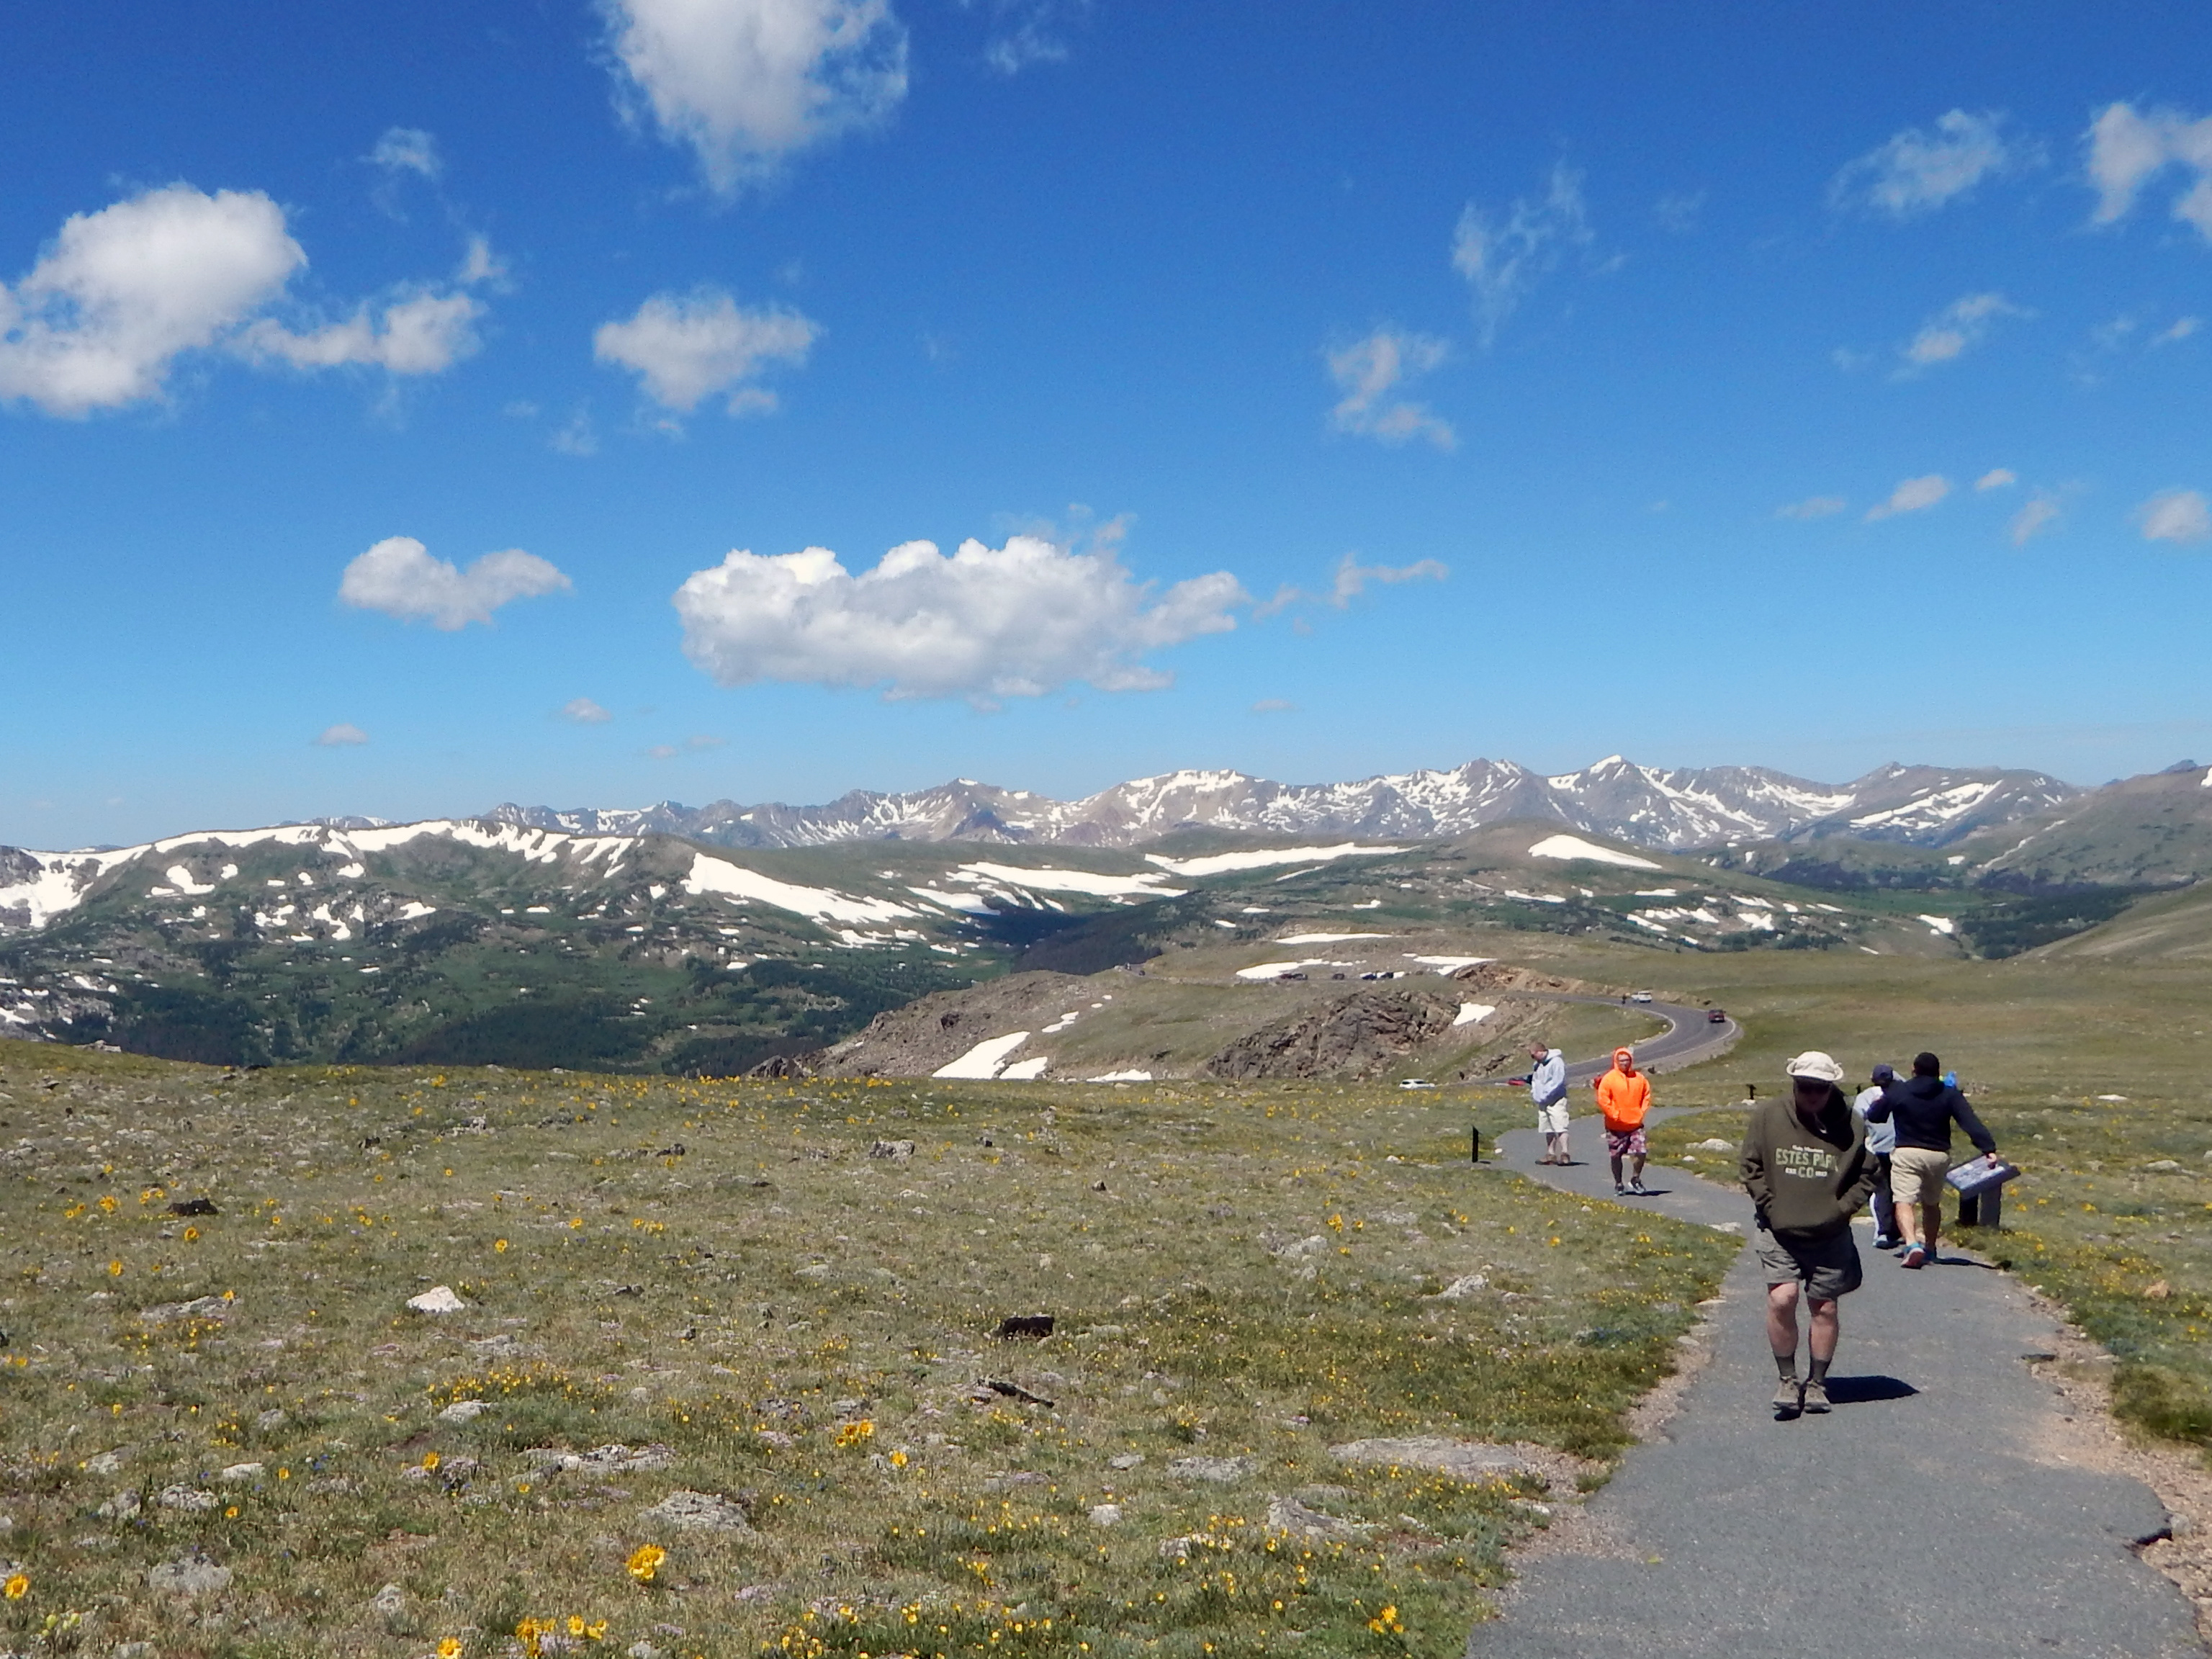 Visitors are hiking on the Tundra Communities Trail in summer. Mountains are in the distance.